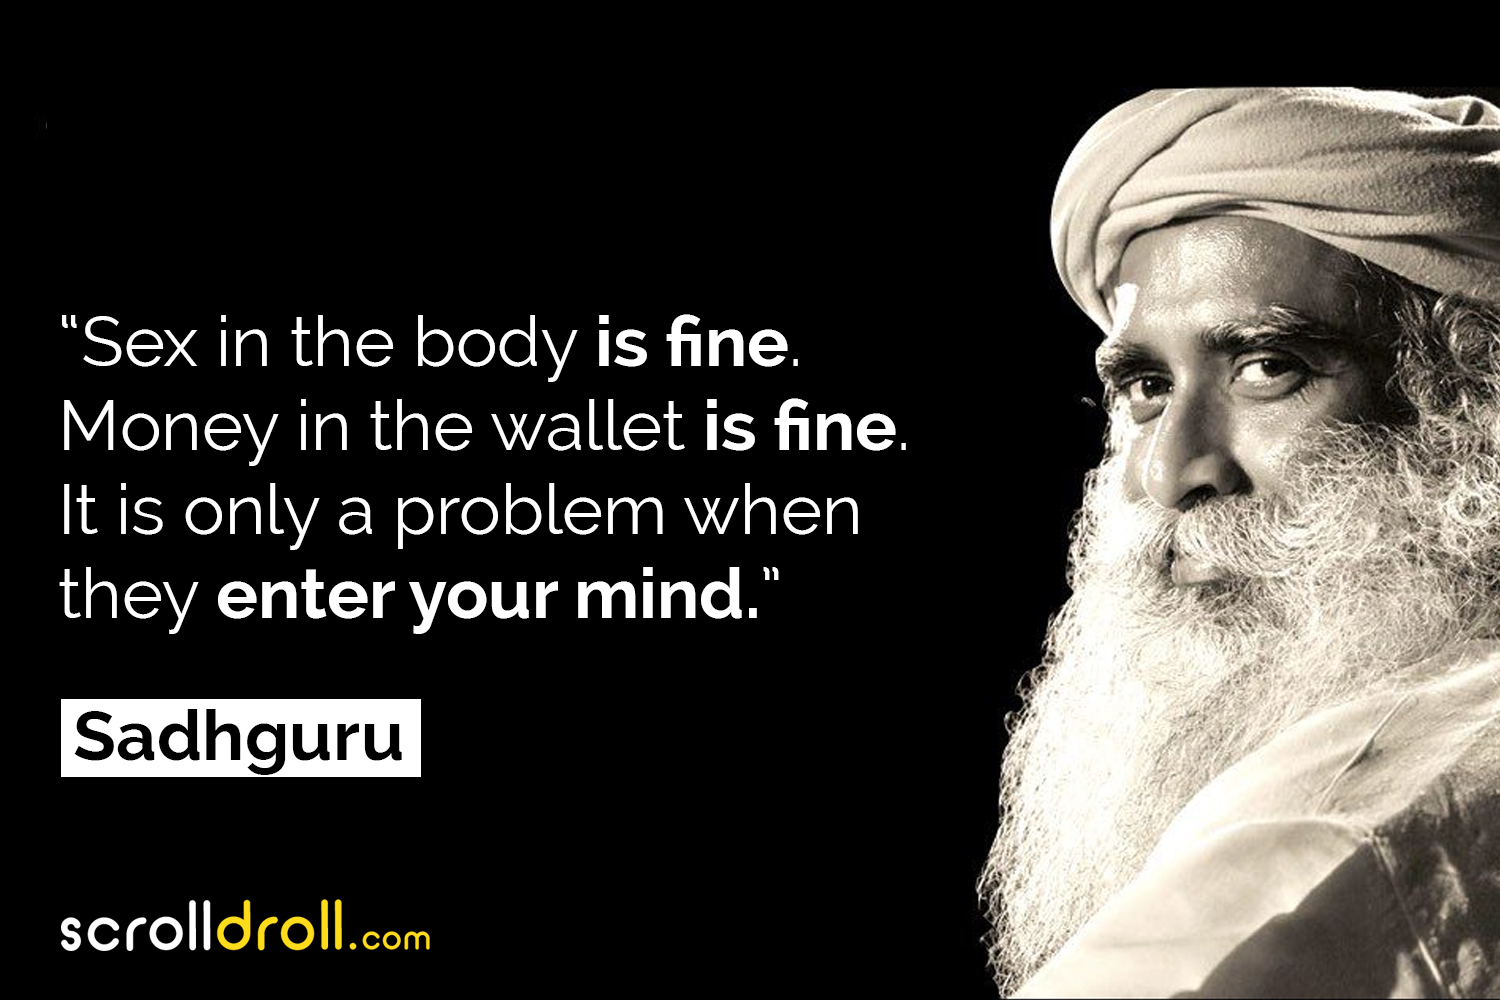 Sadhguru-Quotes-7 - The Best of Indian Pop Culture & What's ...